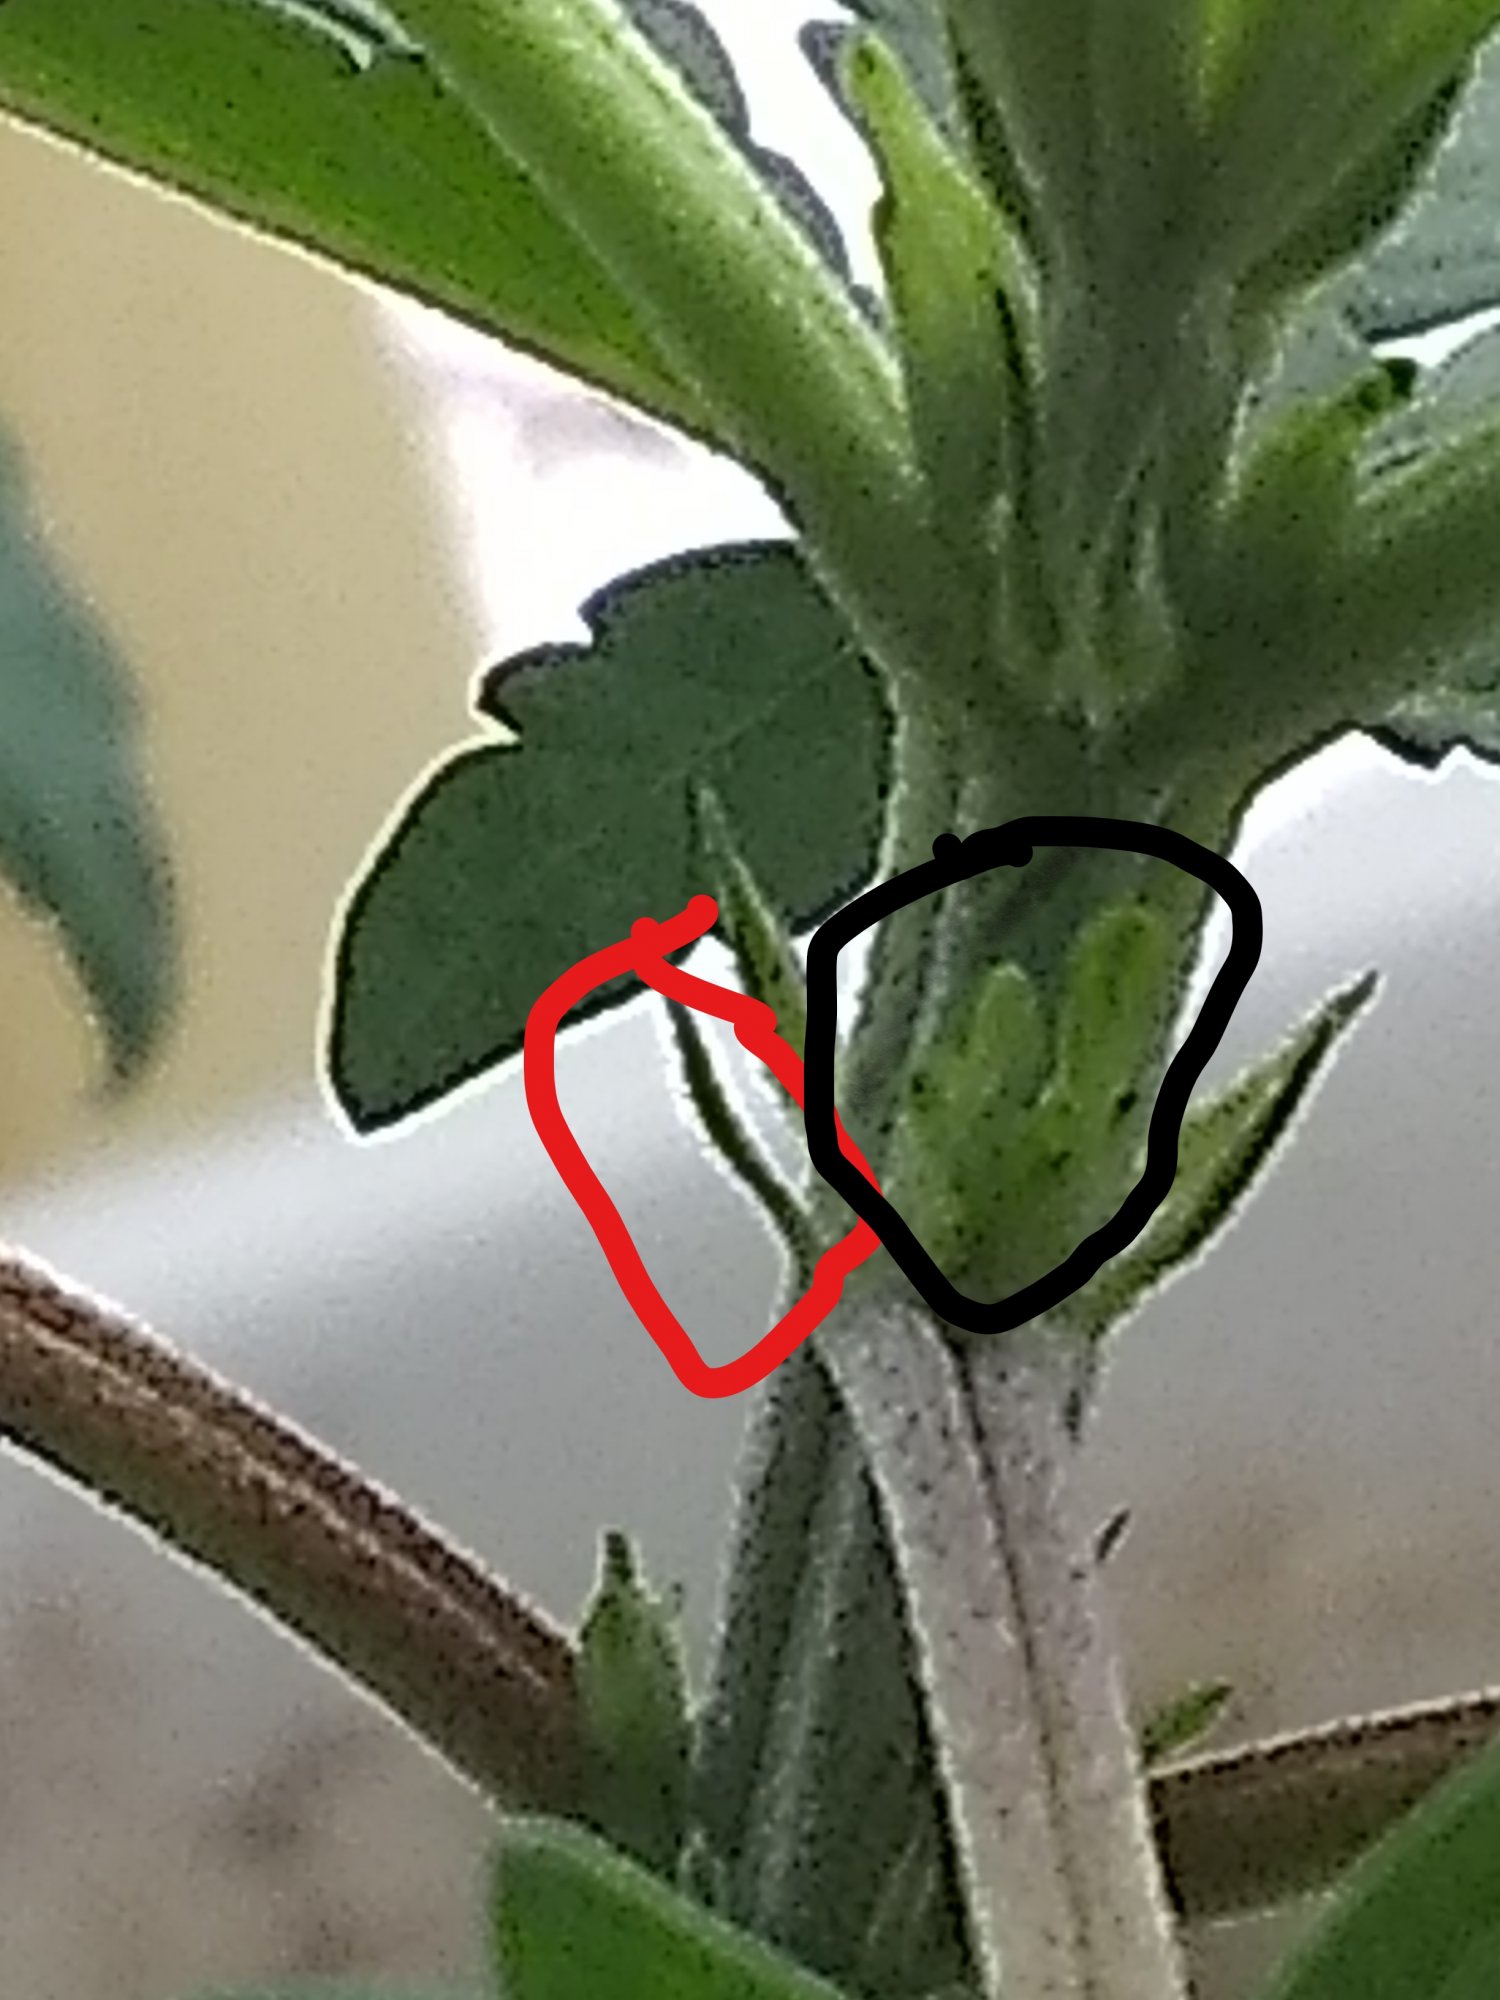 Is this plant starting to sex